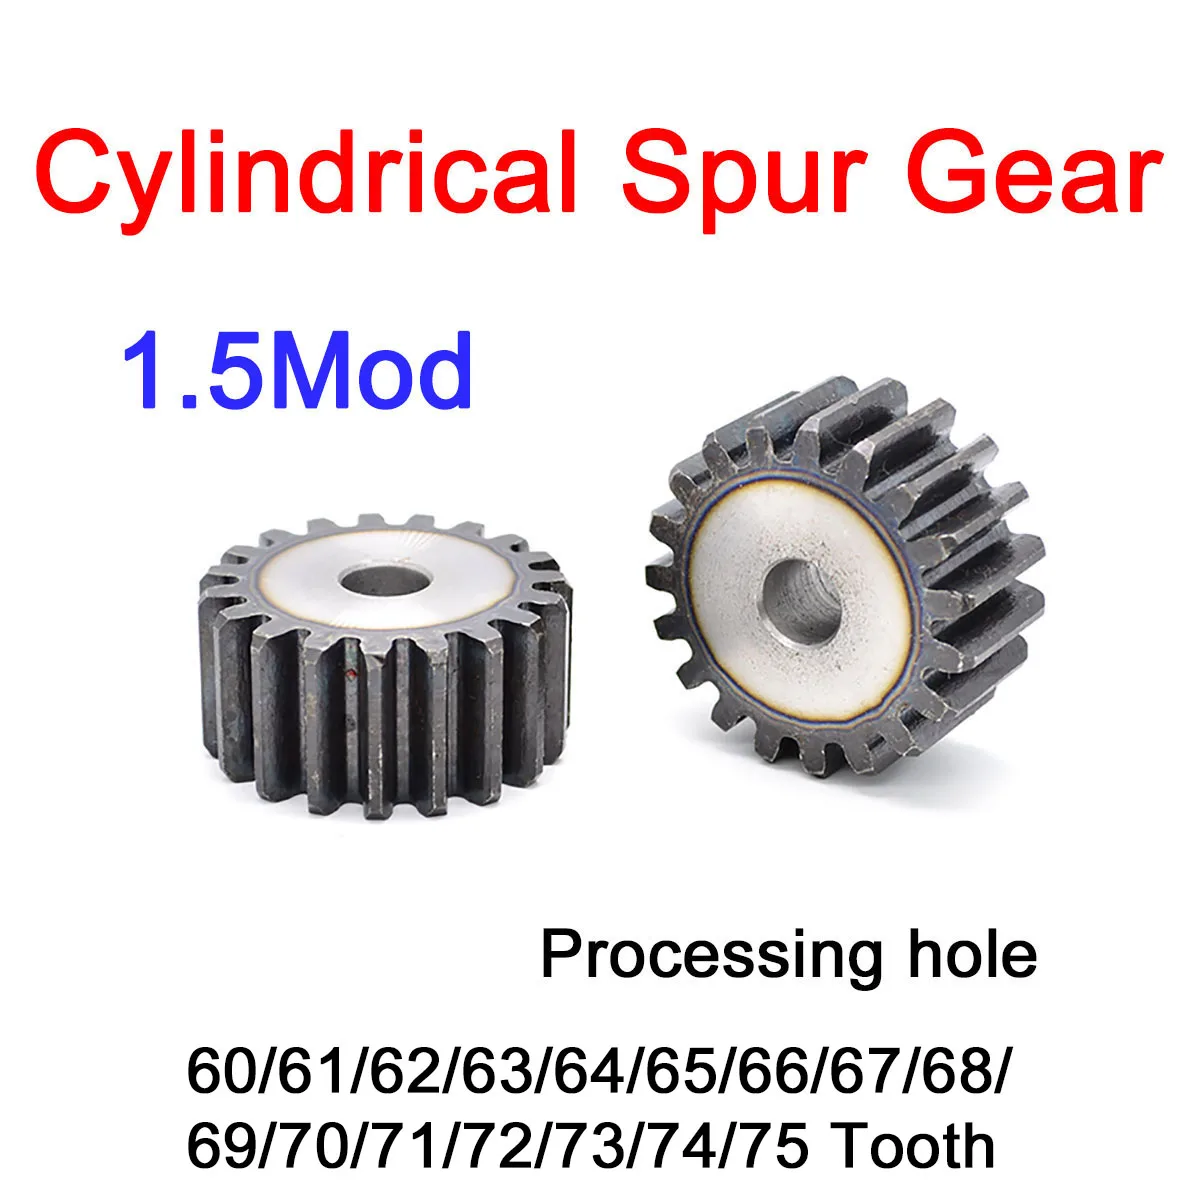 

1Pc 1.5Mod Cylindrical Spur Gear Carbon Steel Gear 60/61/62/63/64/65/66/67/68/69/70/71/72/73/74/75 Tooth Processing Hole